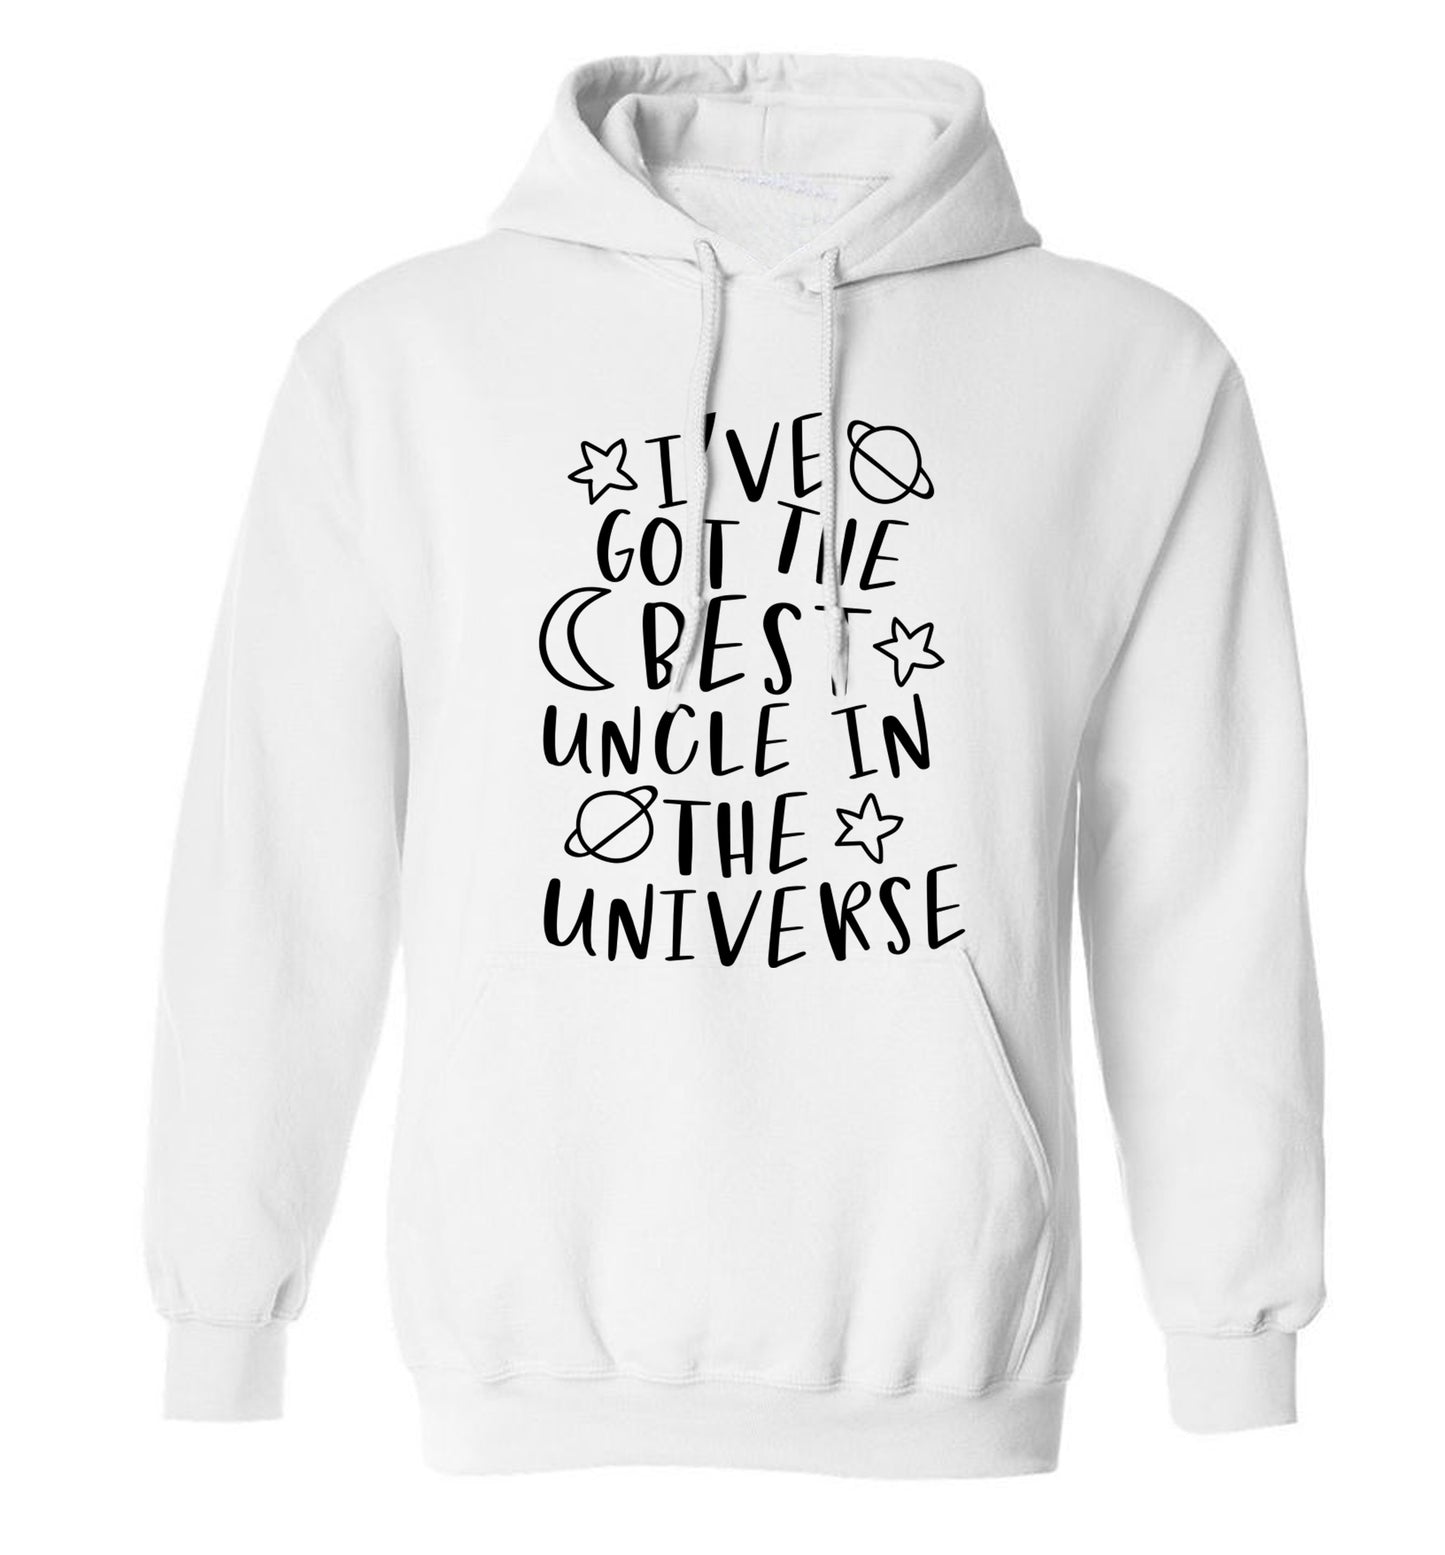 I've got the best uncle in the universe adults unisex white hoodie 2XL